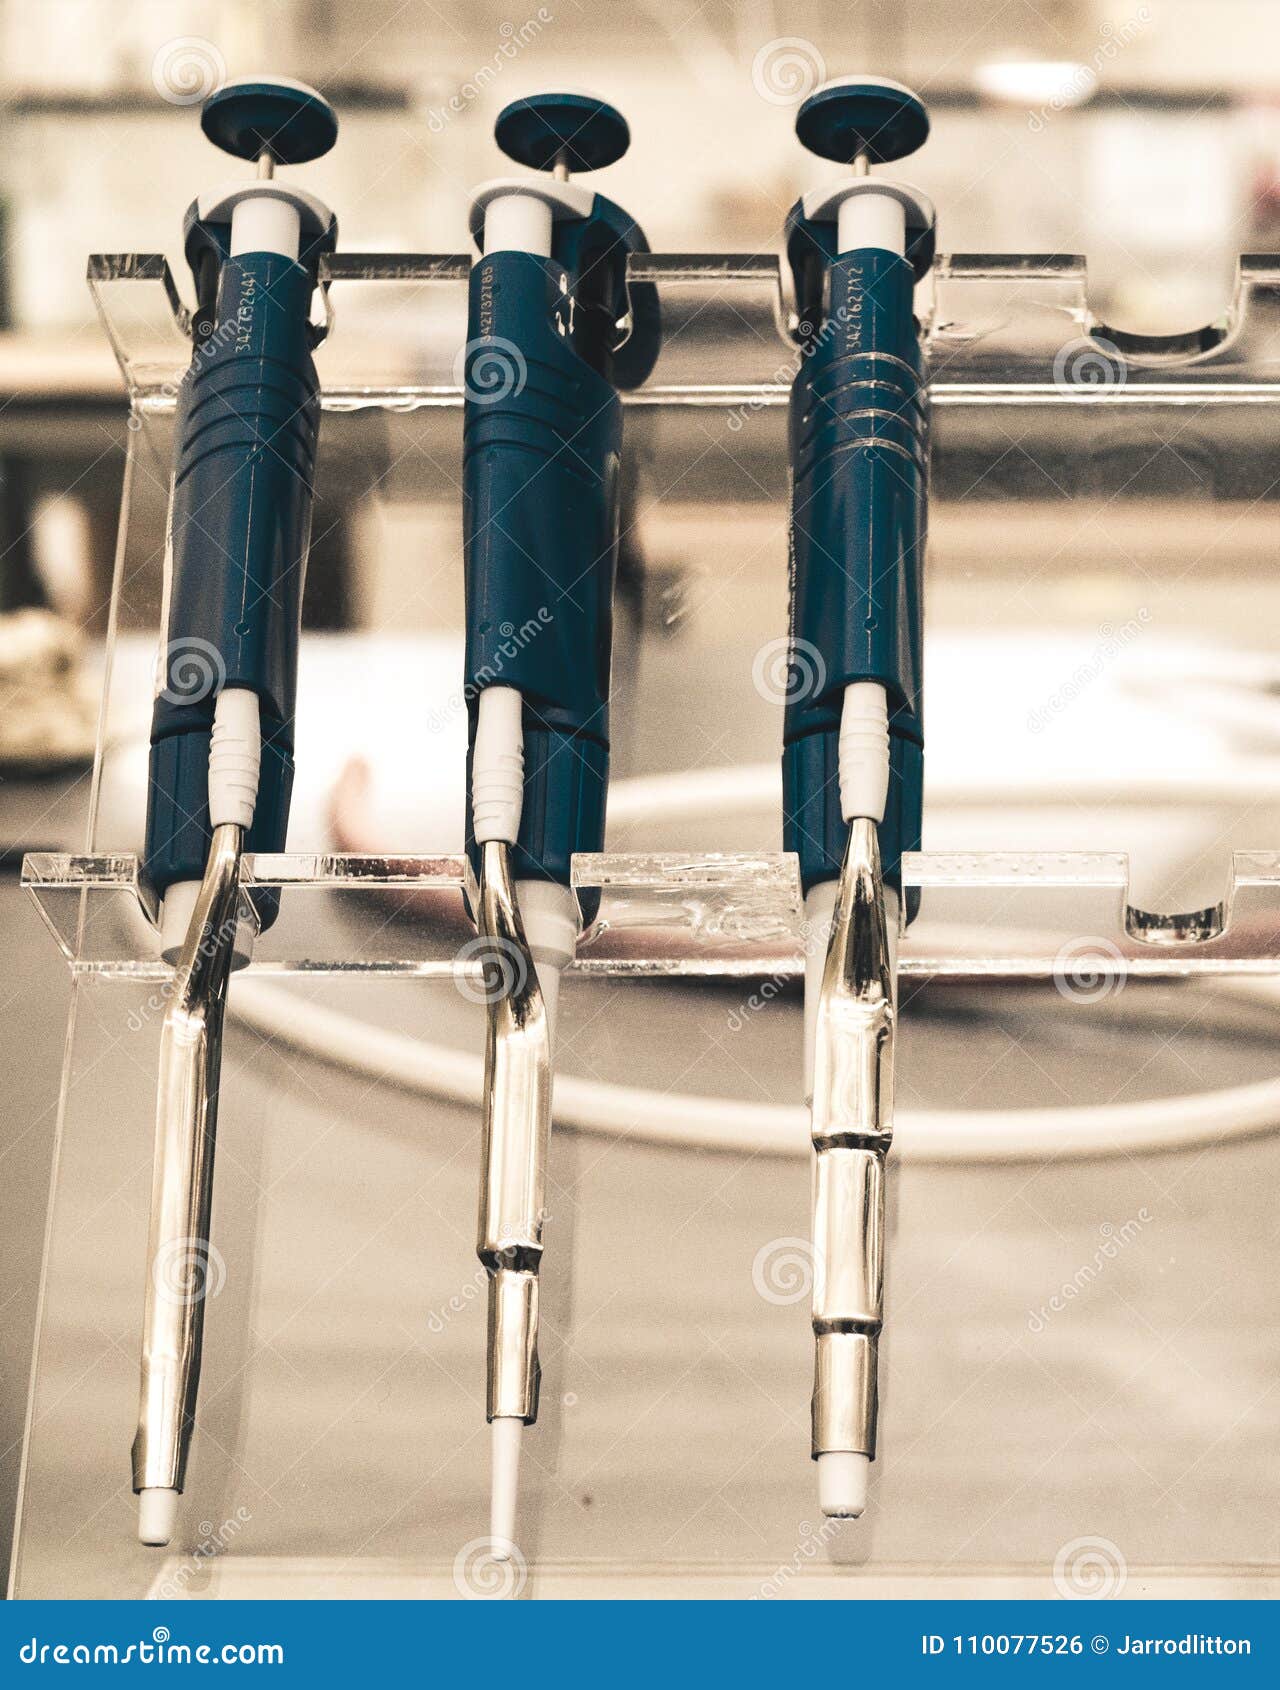 replicating pipettes on a stand in a research lab.